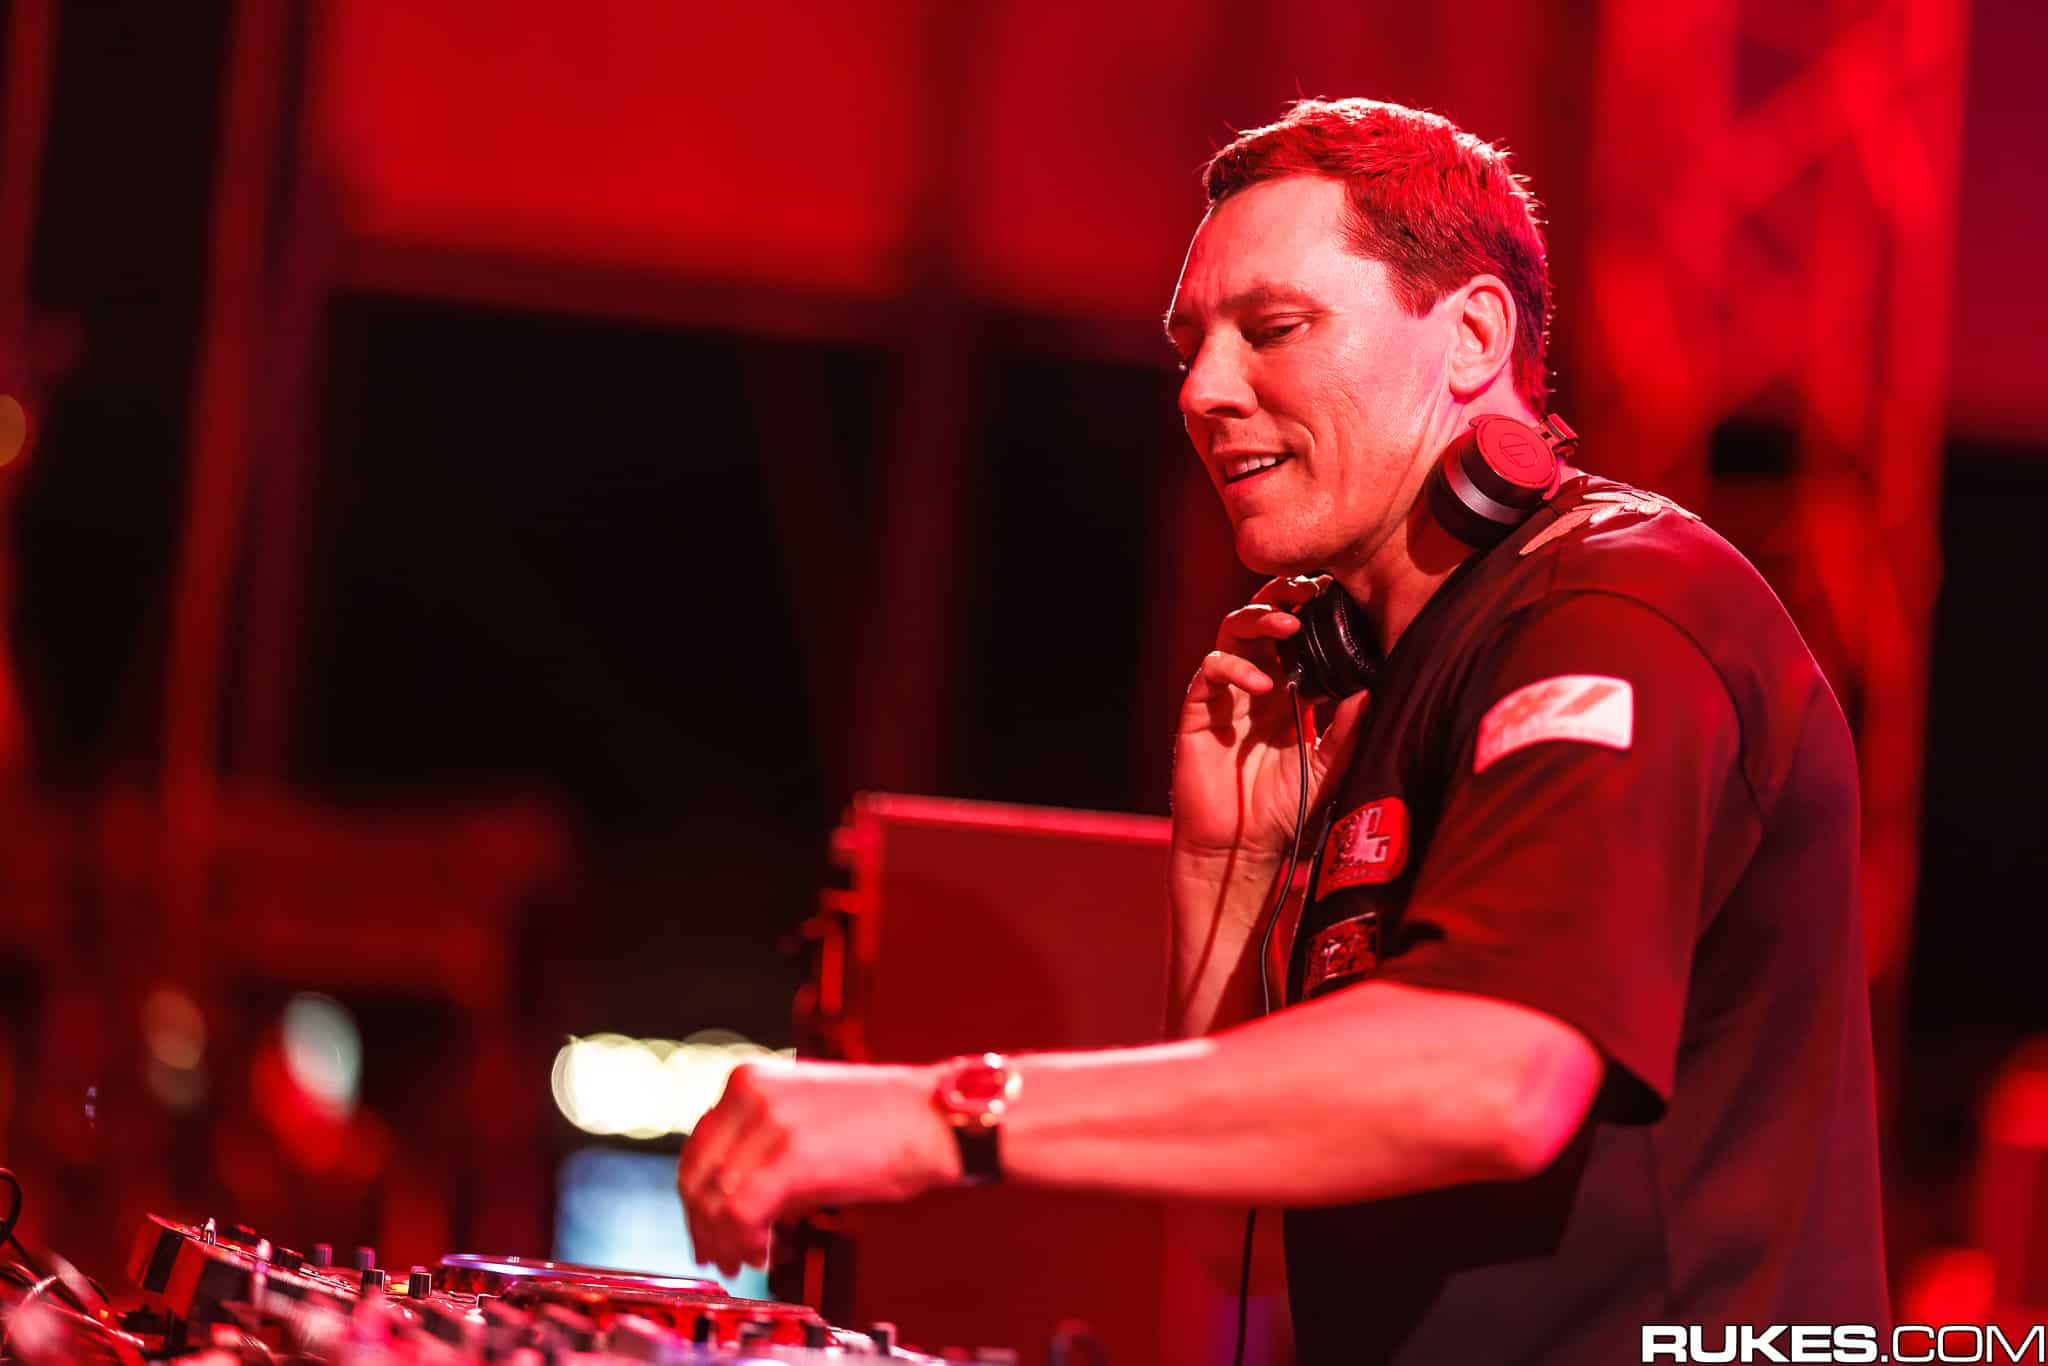 Tiësto closes out the first day of Tomorrowland 2023 mainstage with a bang: Live